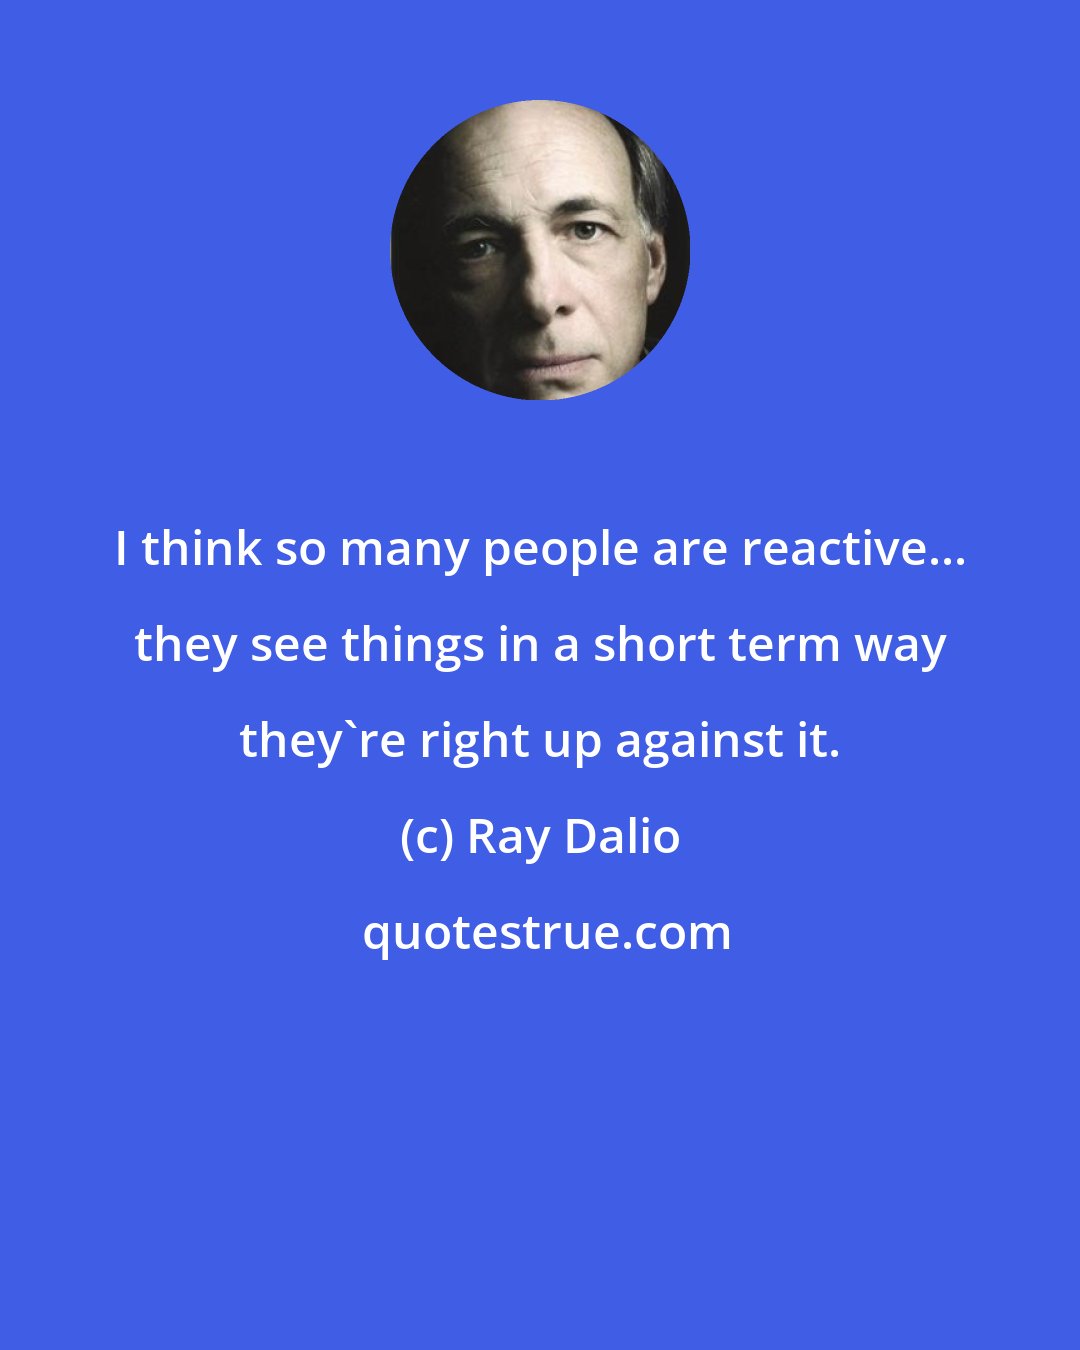 Ray Dalio: I think so many people are reactive... they see things in a short term way they're right up against it.